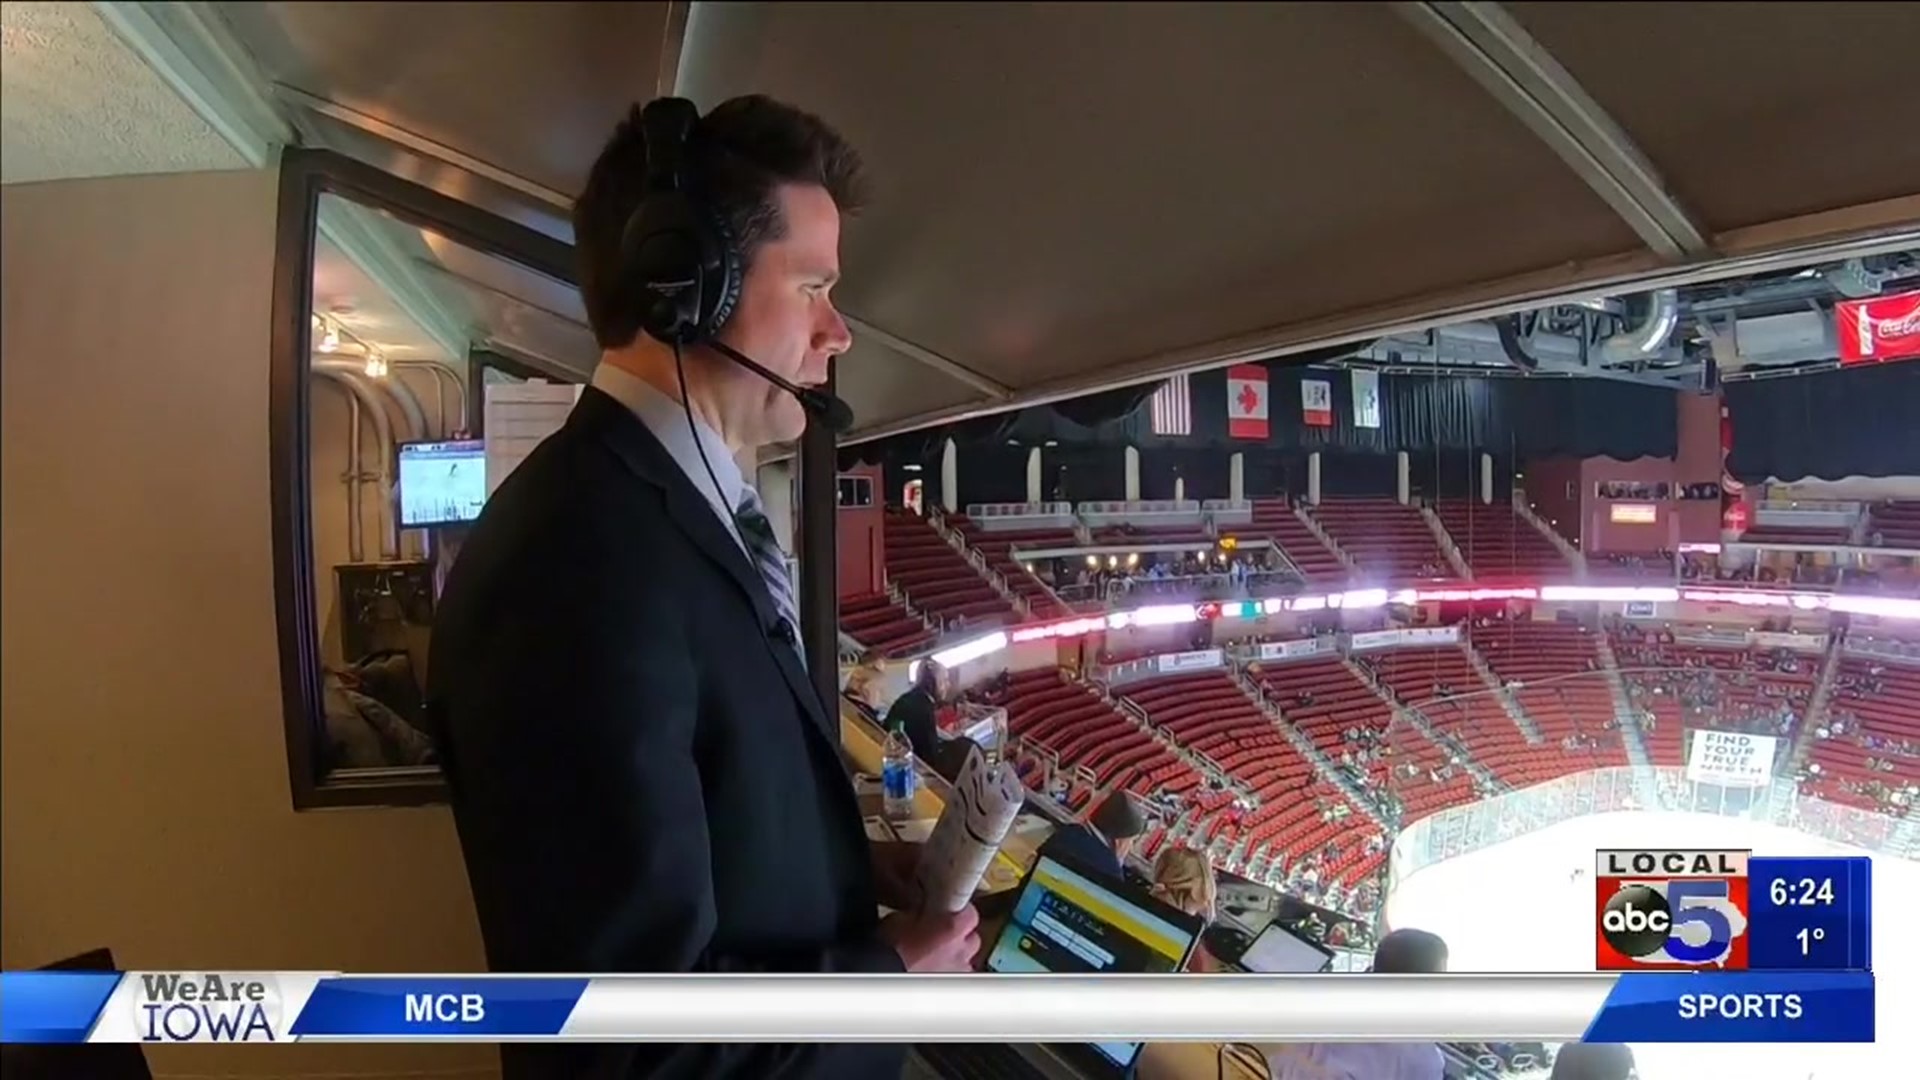 Joe O'Donnell has been in the radio broadcasting business for more than two decades. After climbing the ranks, he finally got the call-up in November of 2019 for four games with the Minnesota Wild